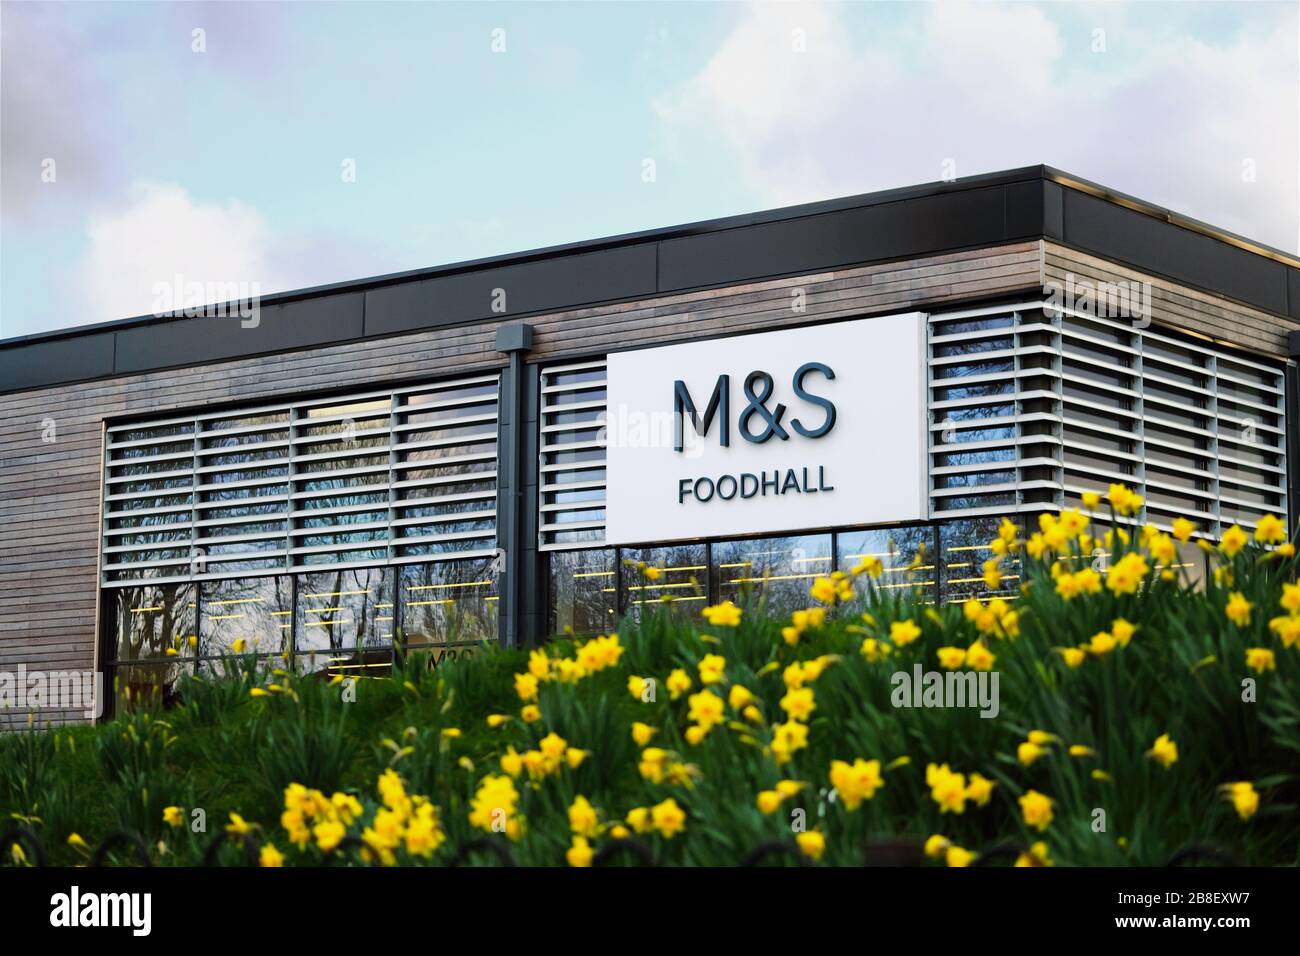 M&S Foodhall supermarket. Marks & Spencer shop front surrounded by flowers. Stock Photo